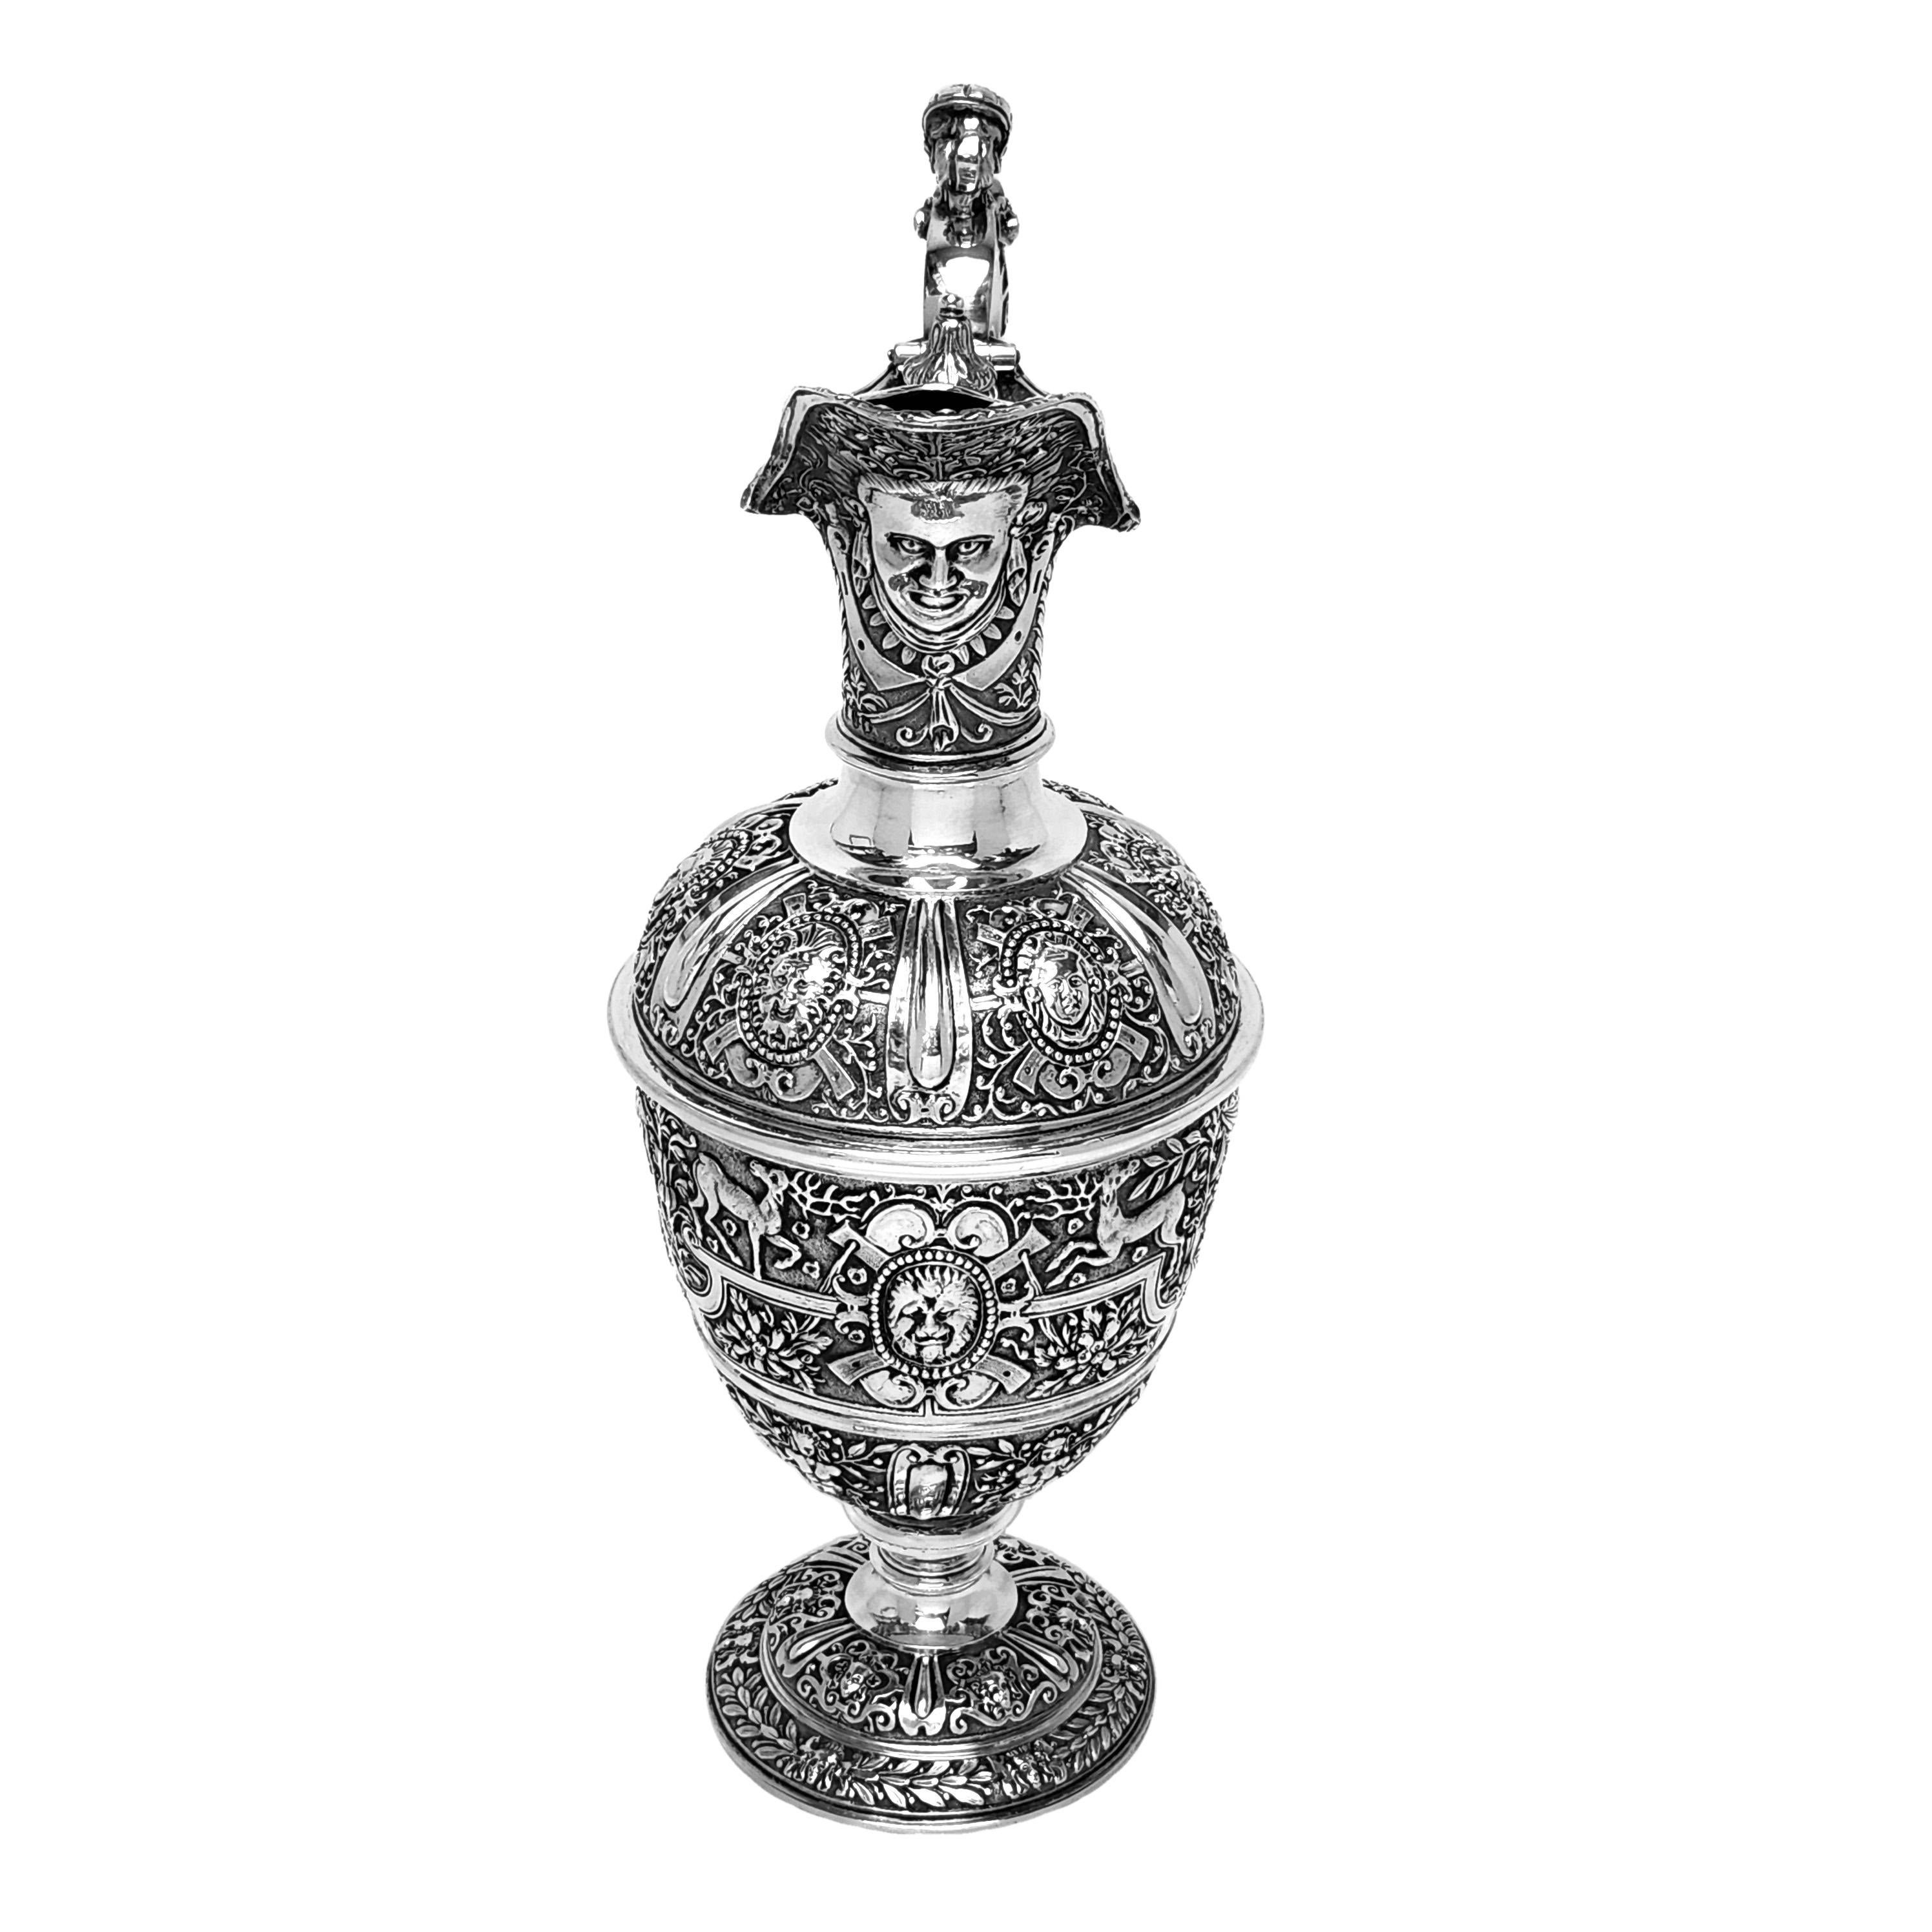 A beautiful Classic Antique Victorian solid Silver Jug in the traditional 'Cellini' design. The Jug features rich, detailed chased patterning and a figural handle and thumb piece. The chased imagery shows classical faces, assorted animals including